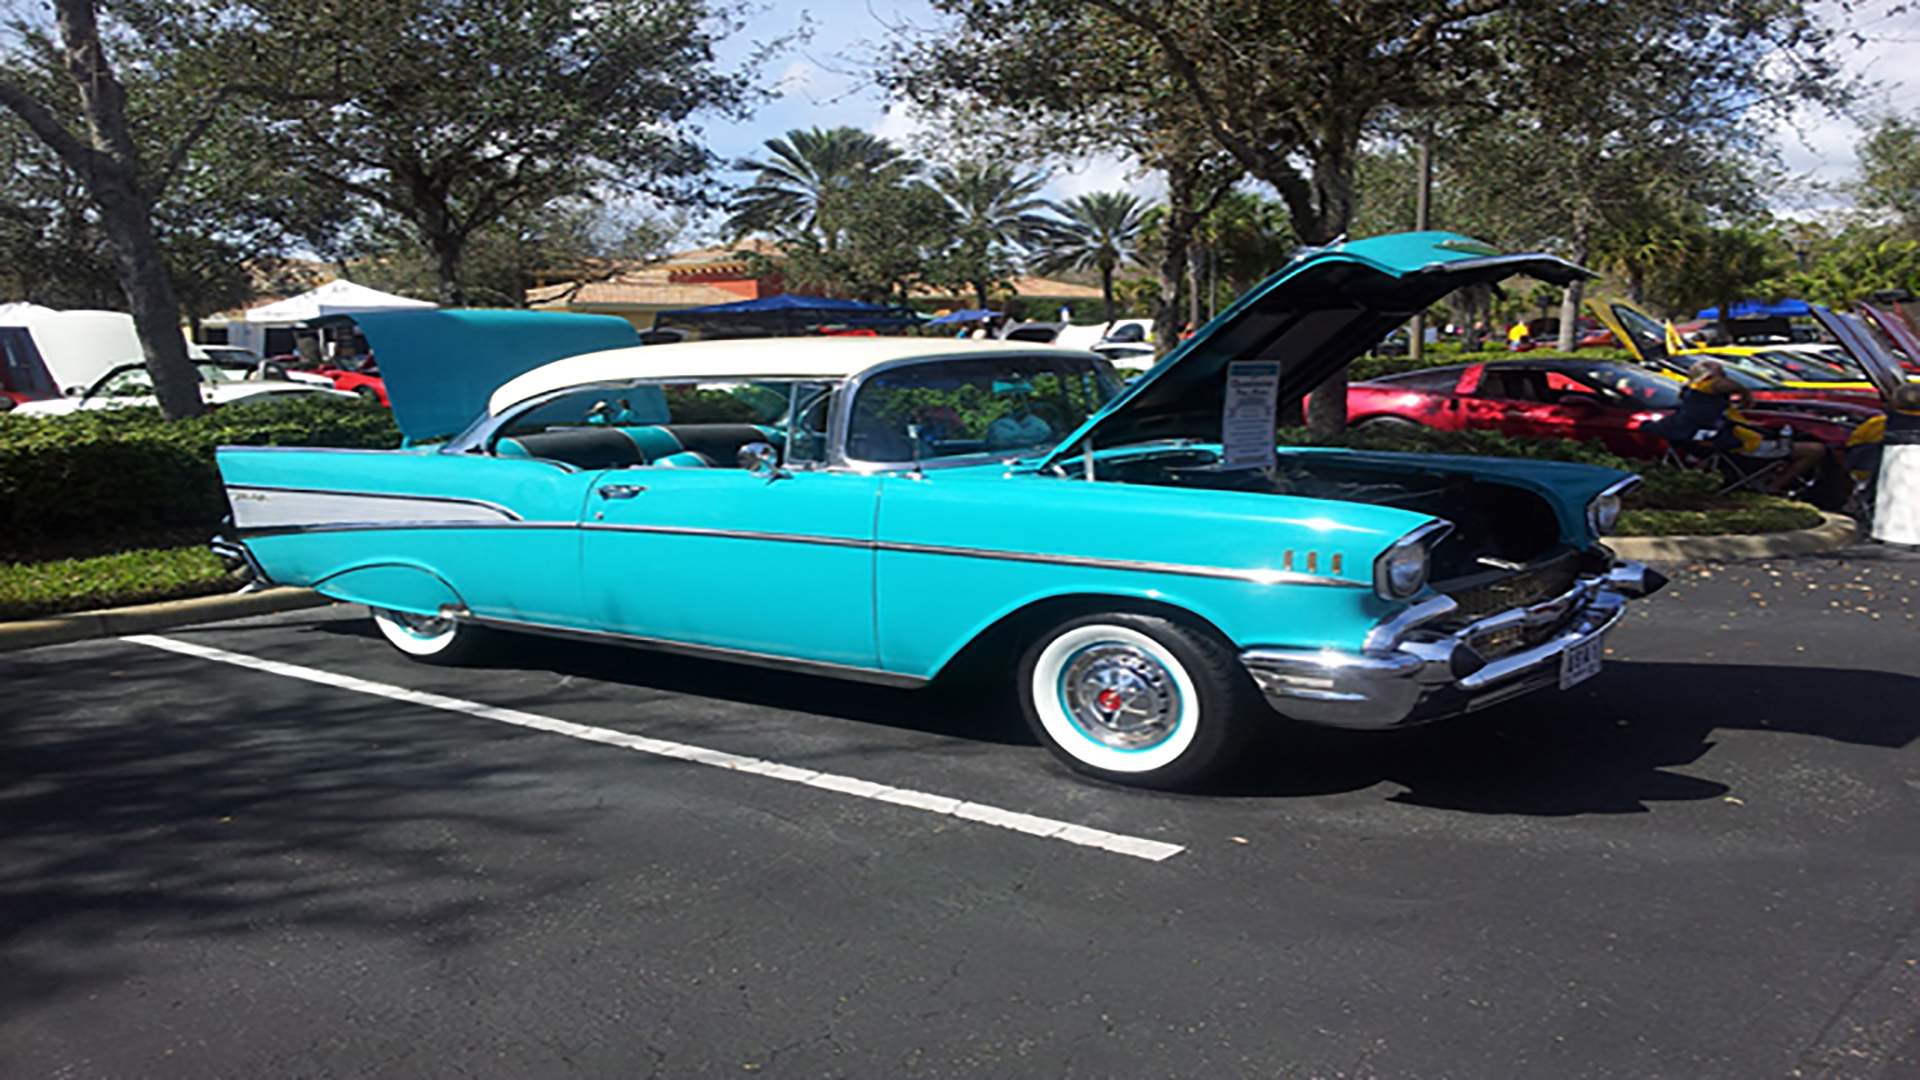 Bell Tower Open Car & Truck Show in Fort Myers Traum Urlaub Florida